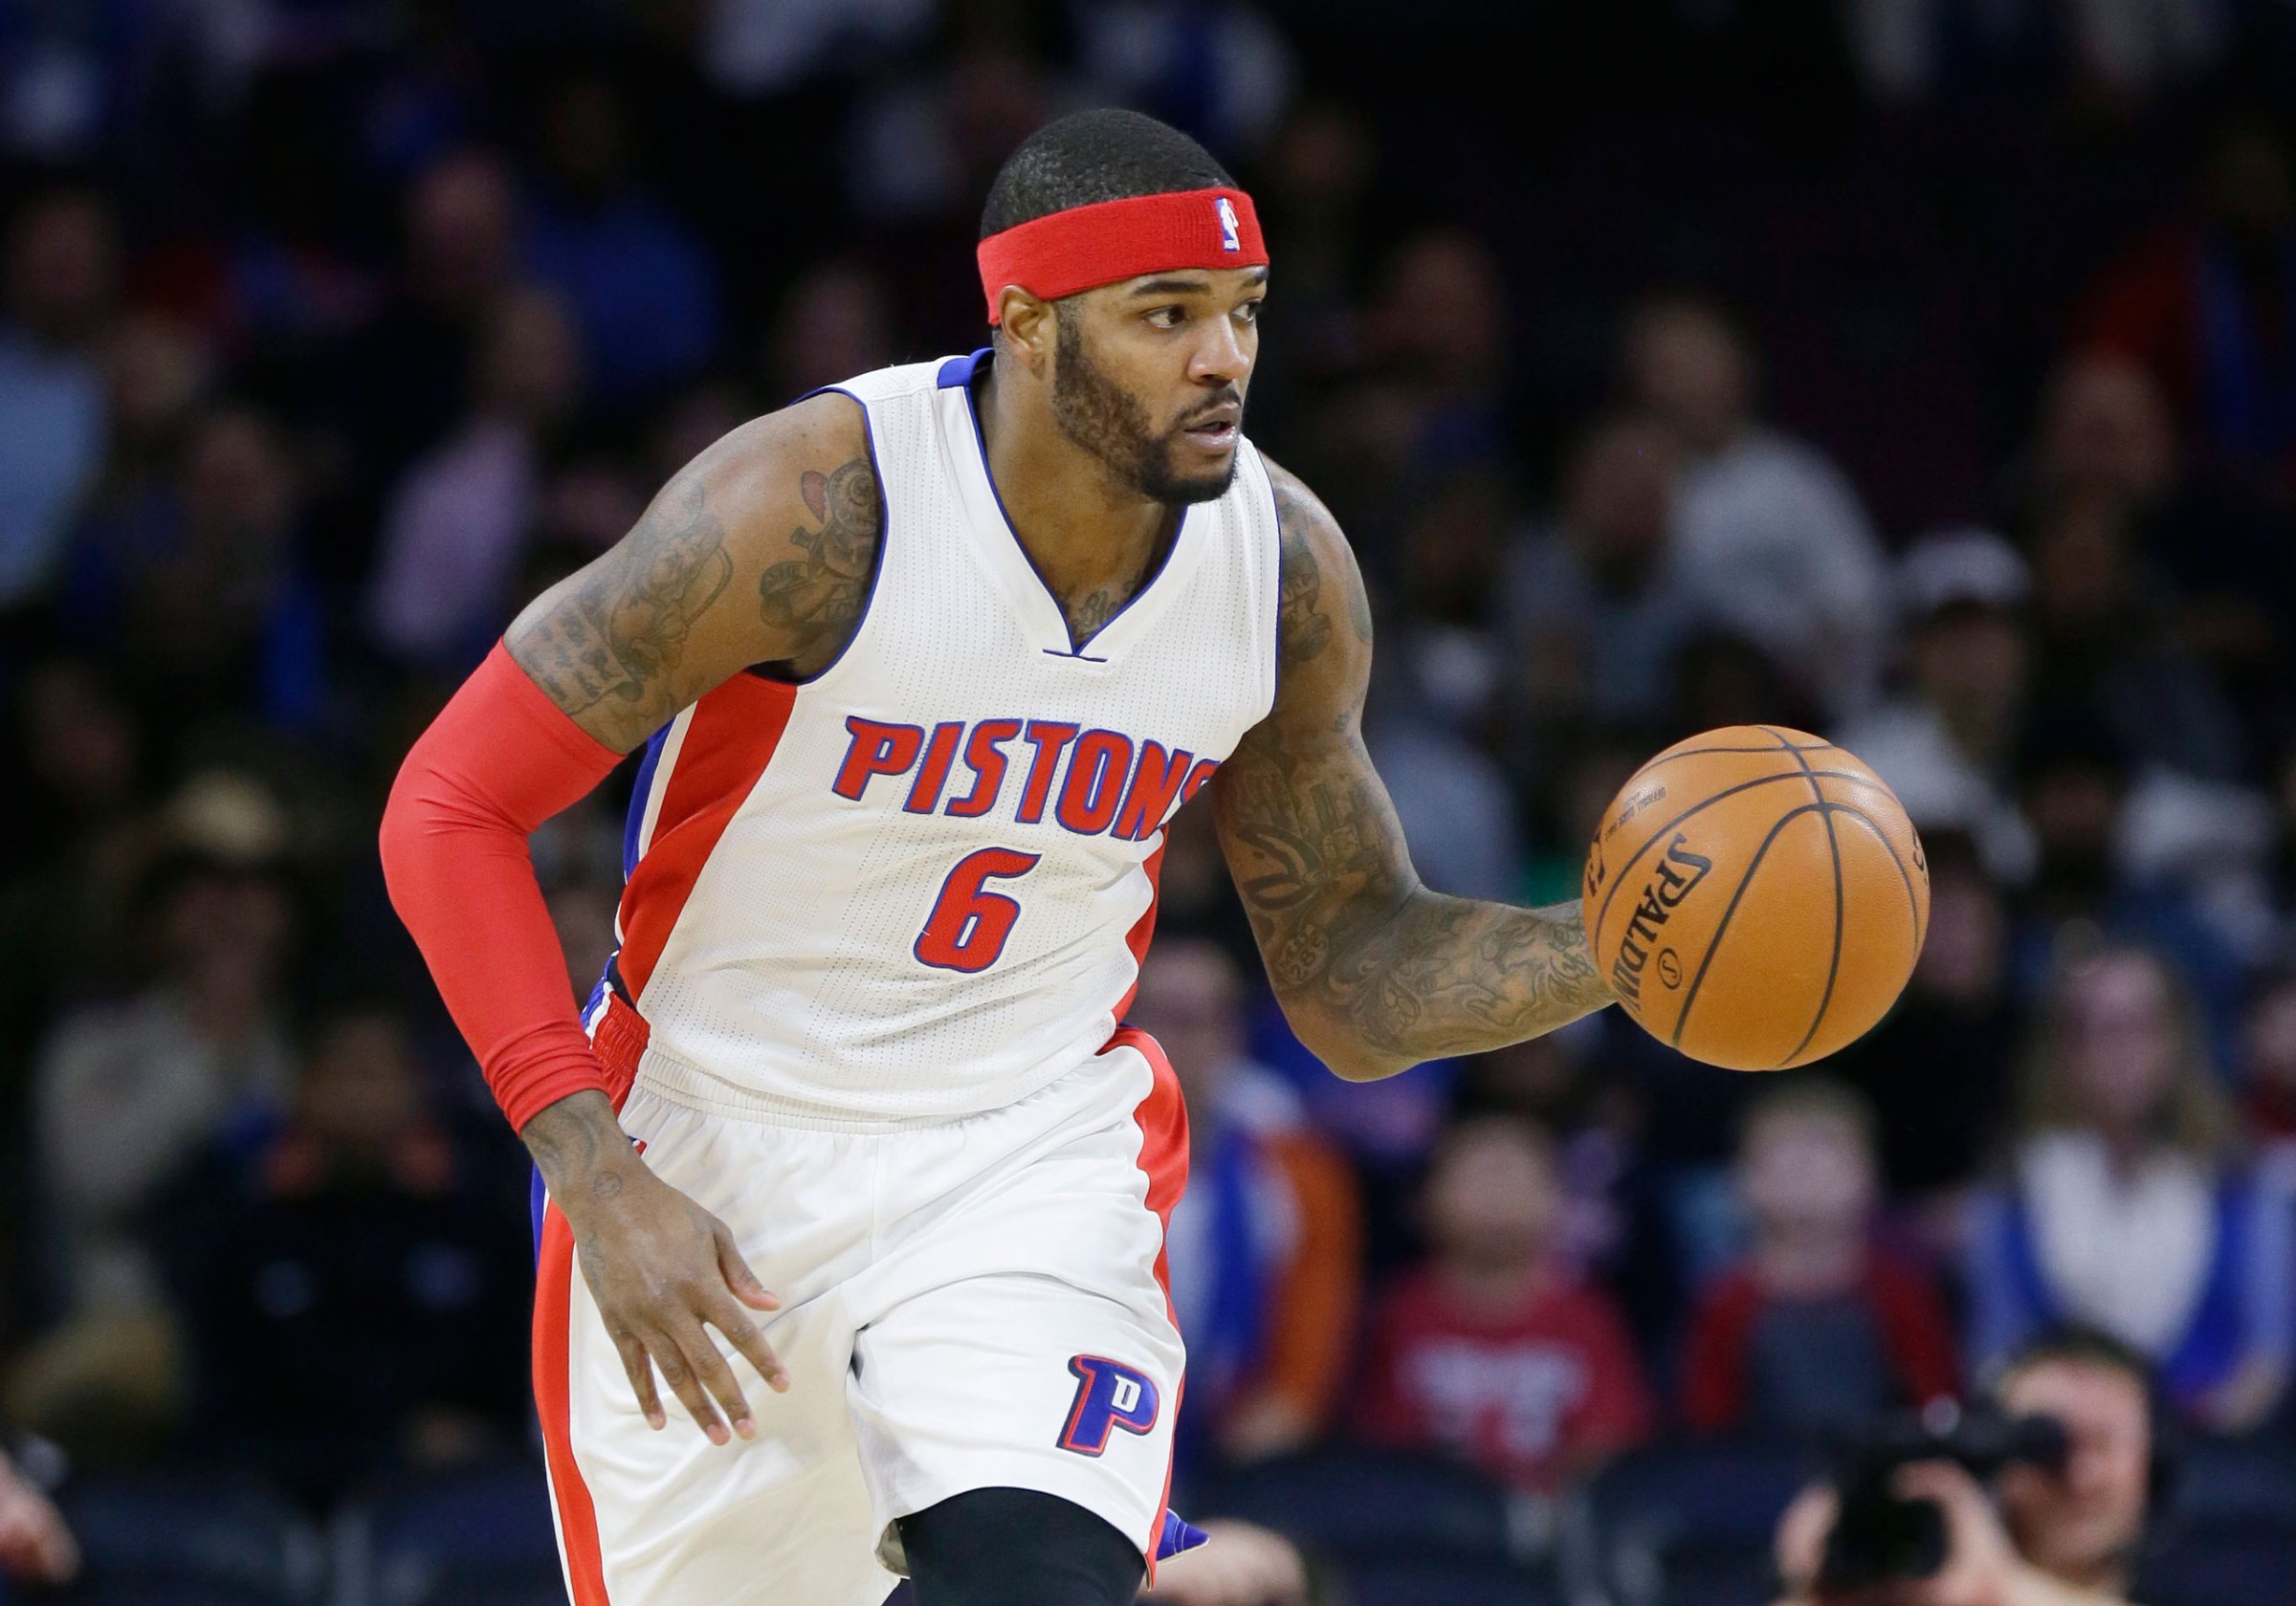 Former Detroit Pistons forward Josh Smith during the first half of an NBA basketball game against the Philadelphia 76ers in Auburn Hills, Mich., on Dec. 6, 2014.